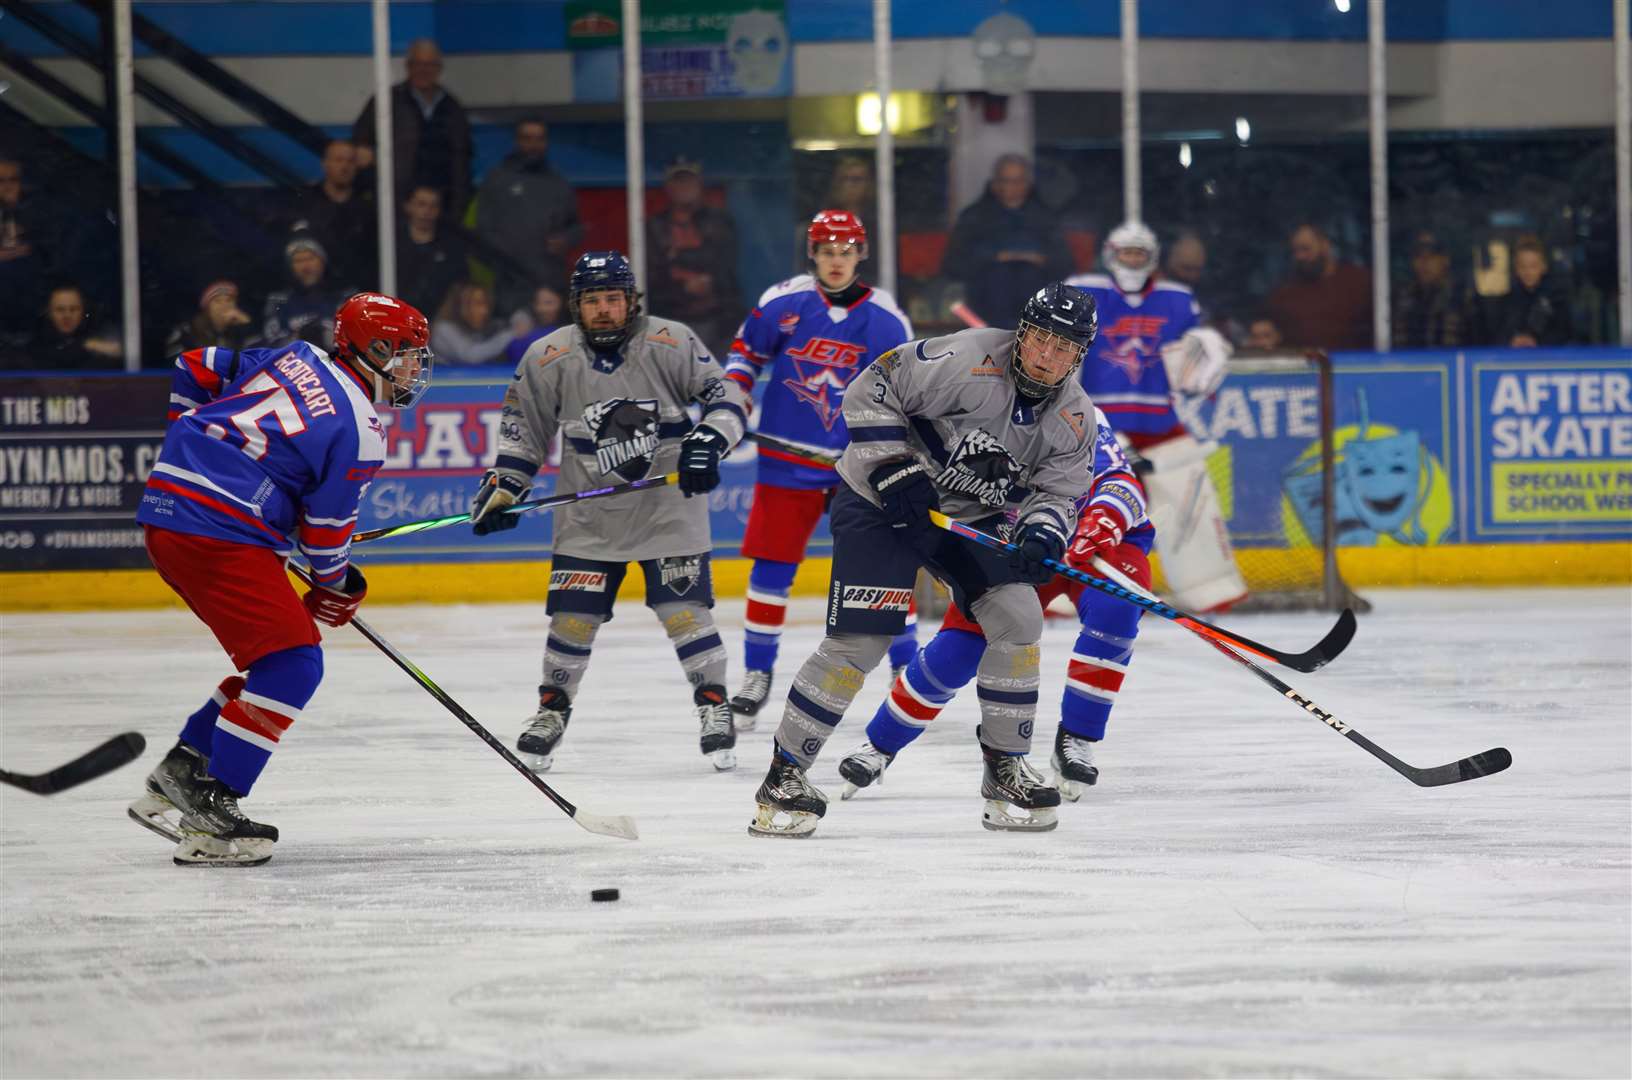 Cup action between Invicta Dynamos and Slough Jets Picture: David Trevallion